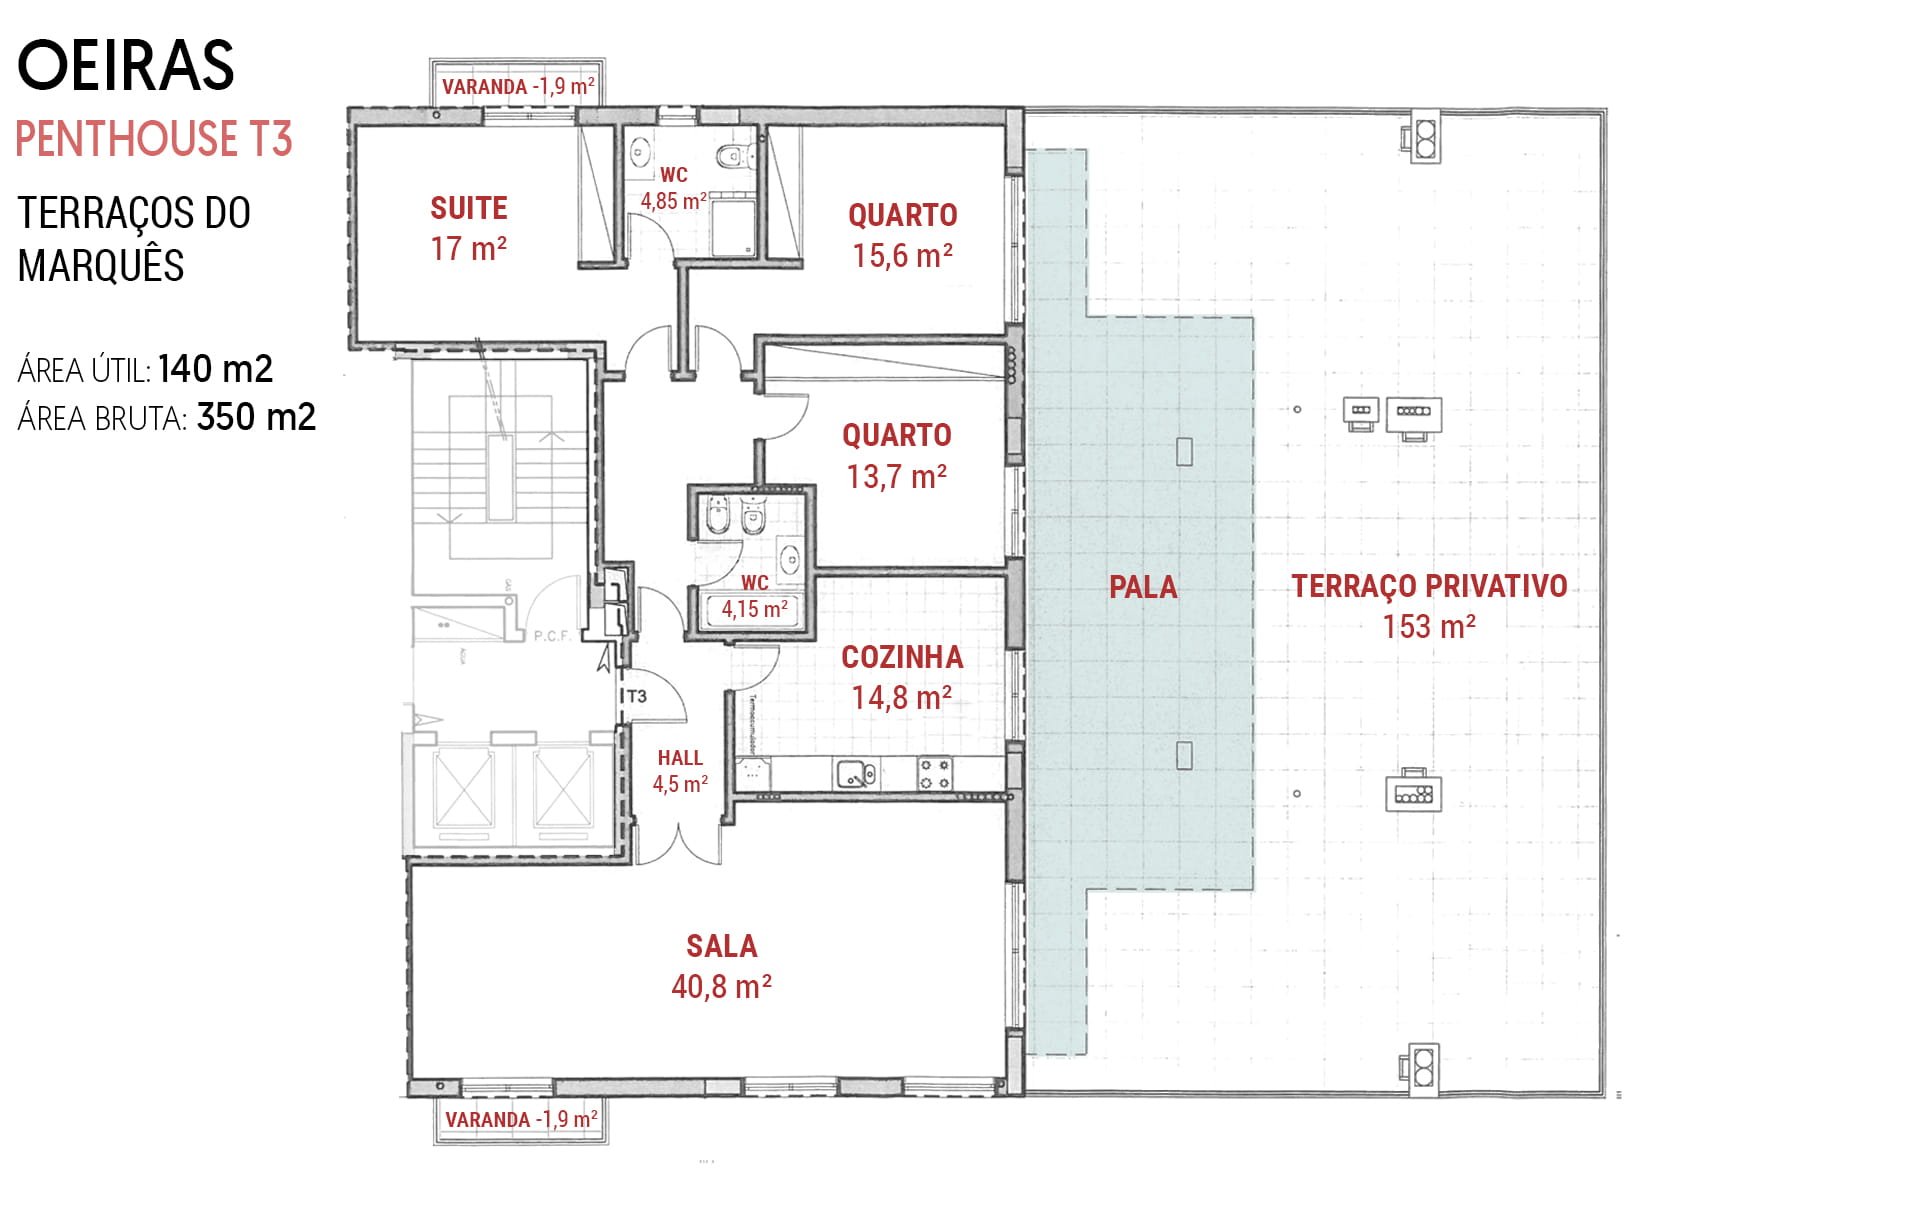 Apartment and Terrace Plan